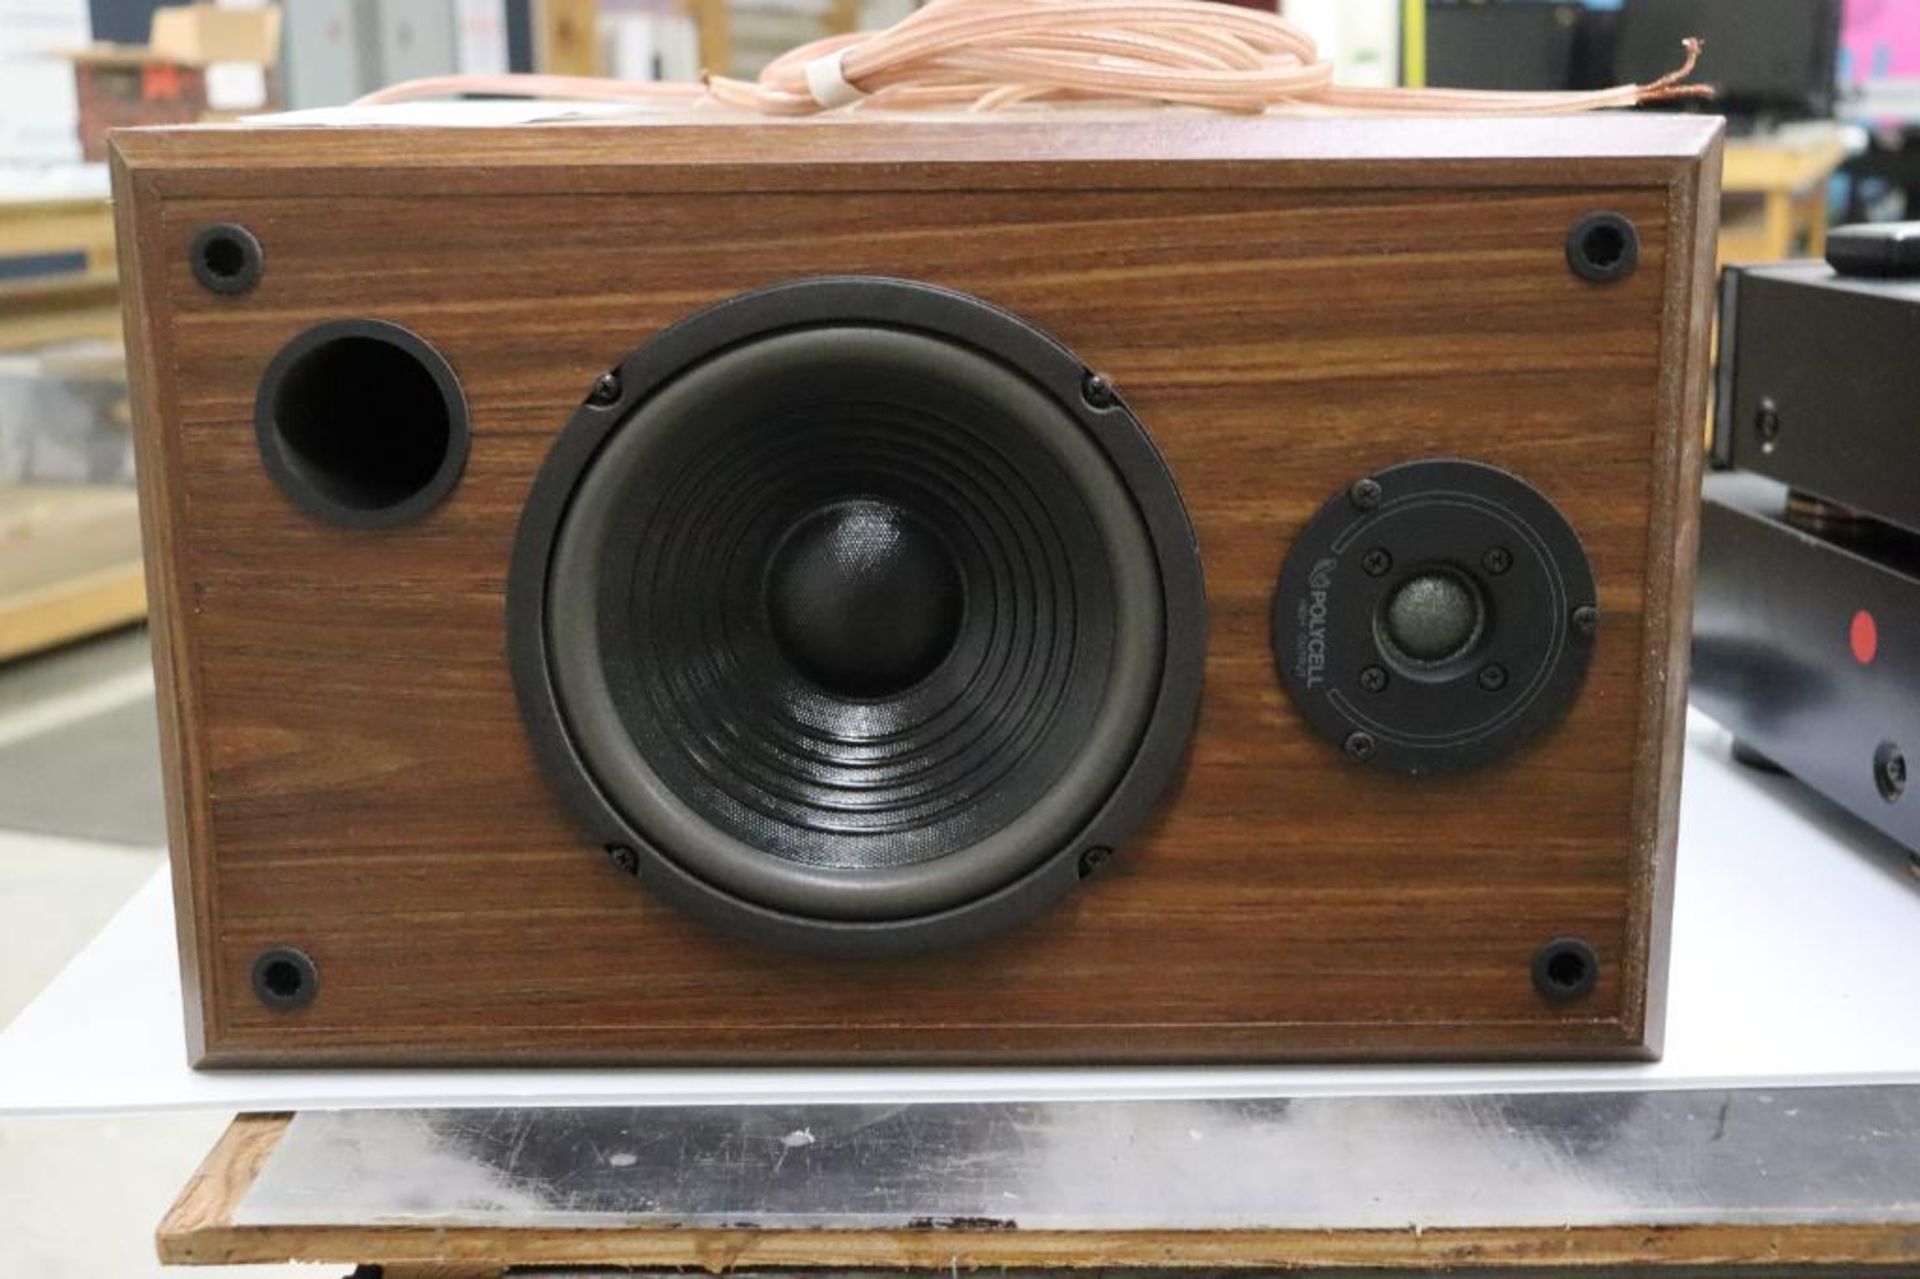 Denon sound system w/ speakers - Image 10 of 11